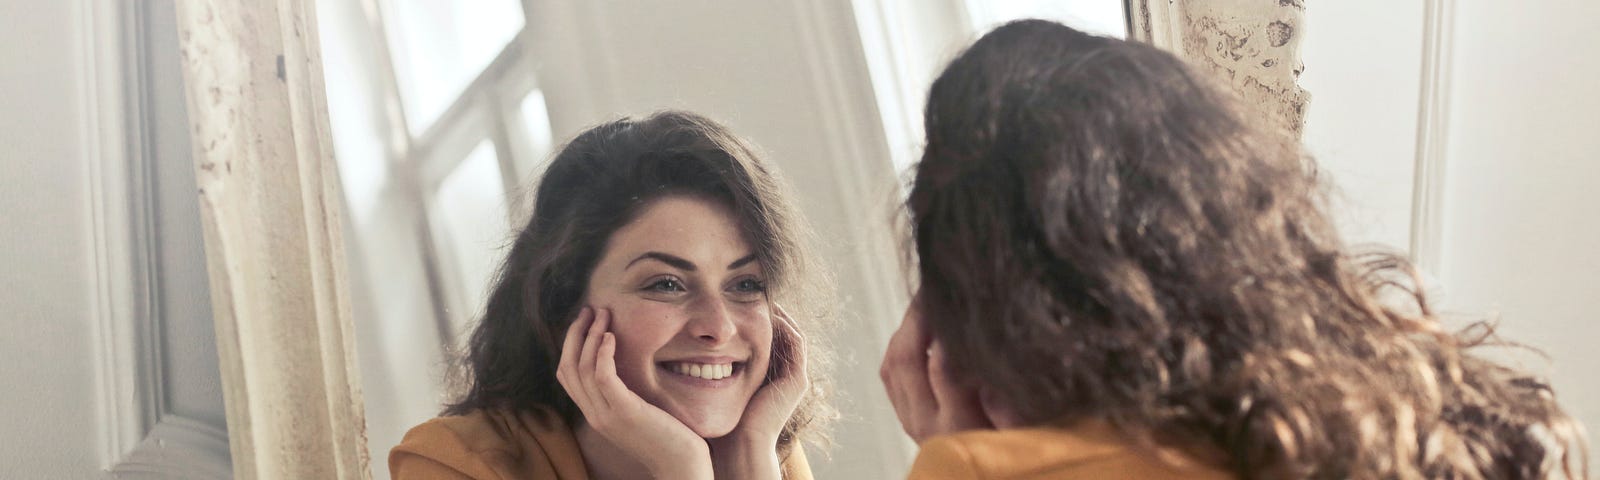 Woman looking into mirror and smiling